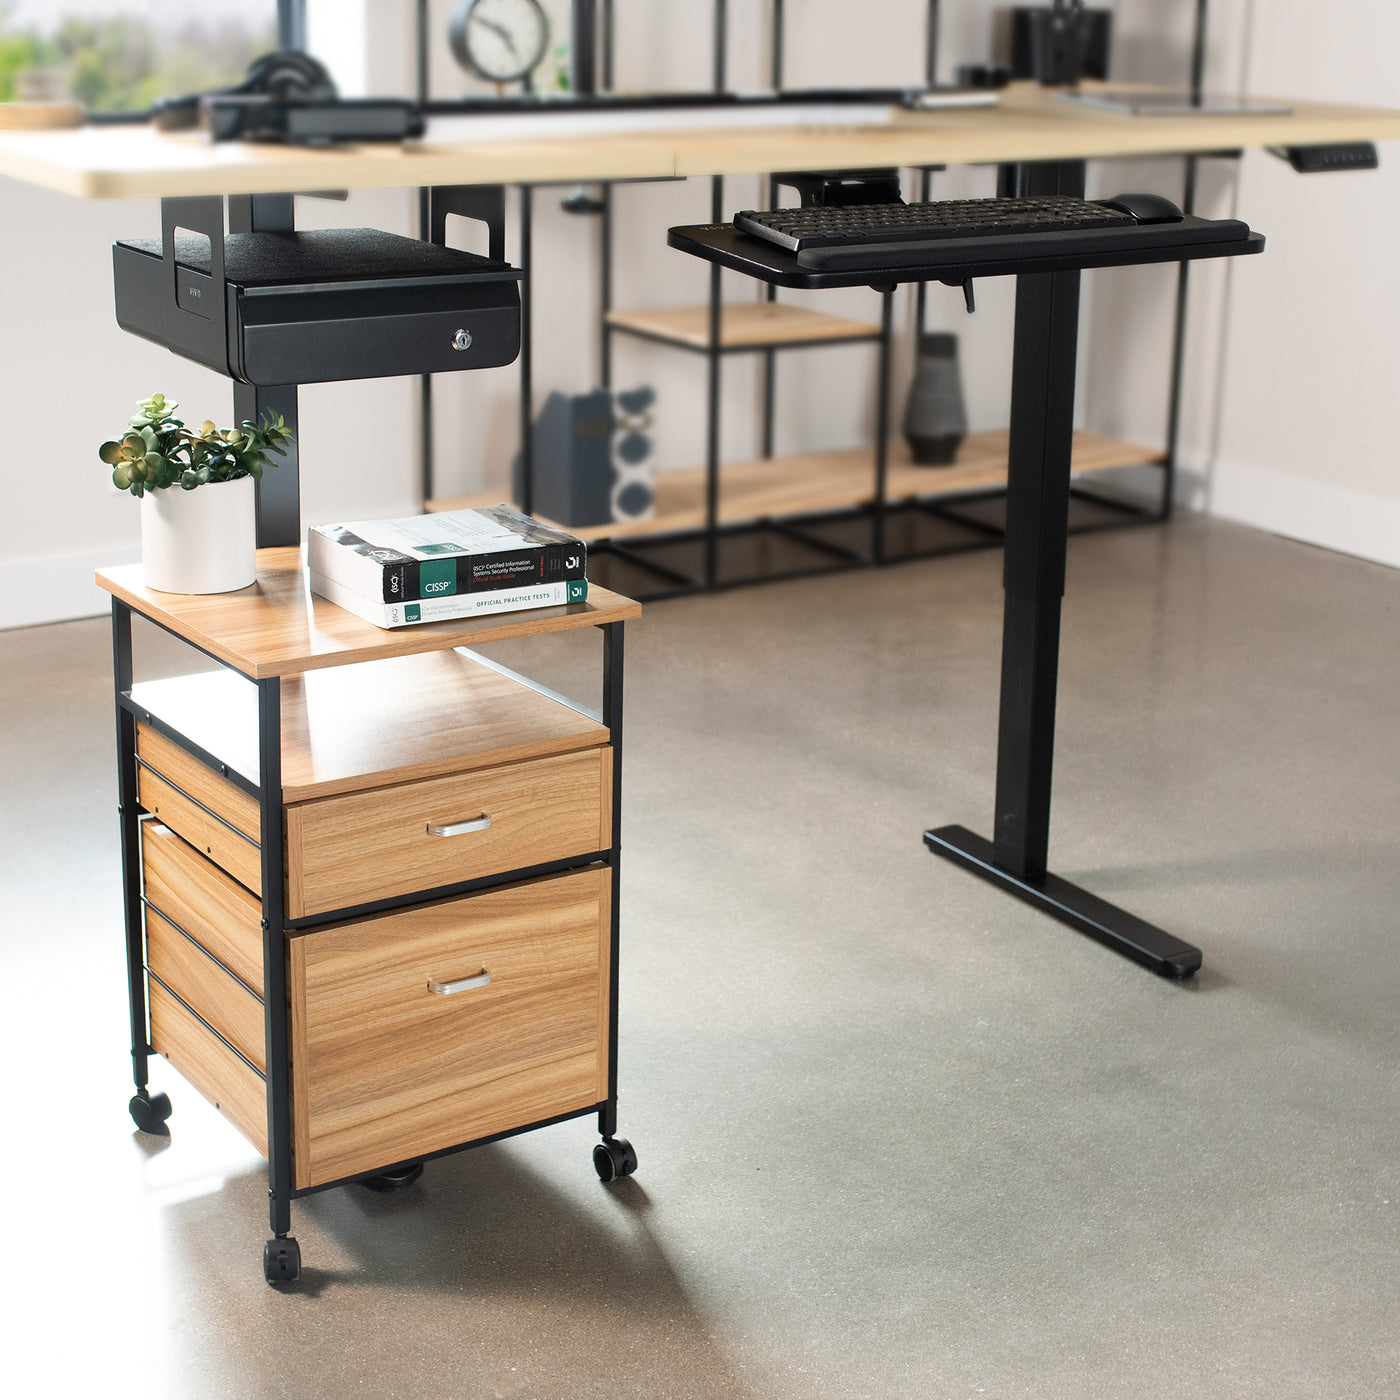 Desk frame with rear set legs saving space and allowing for modern under-desk storage.